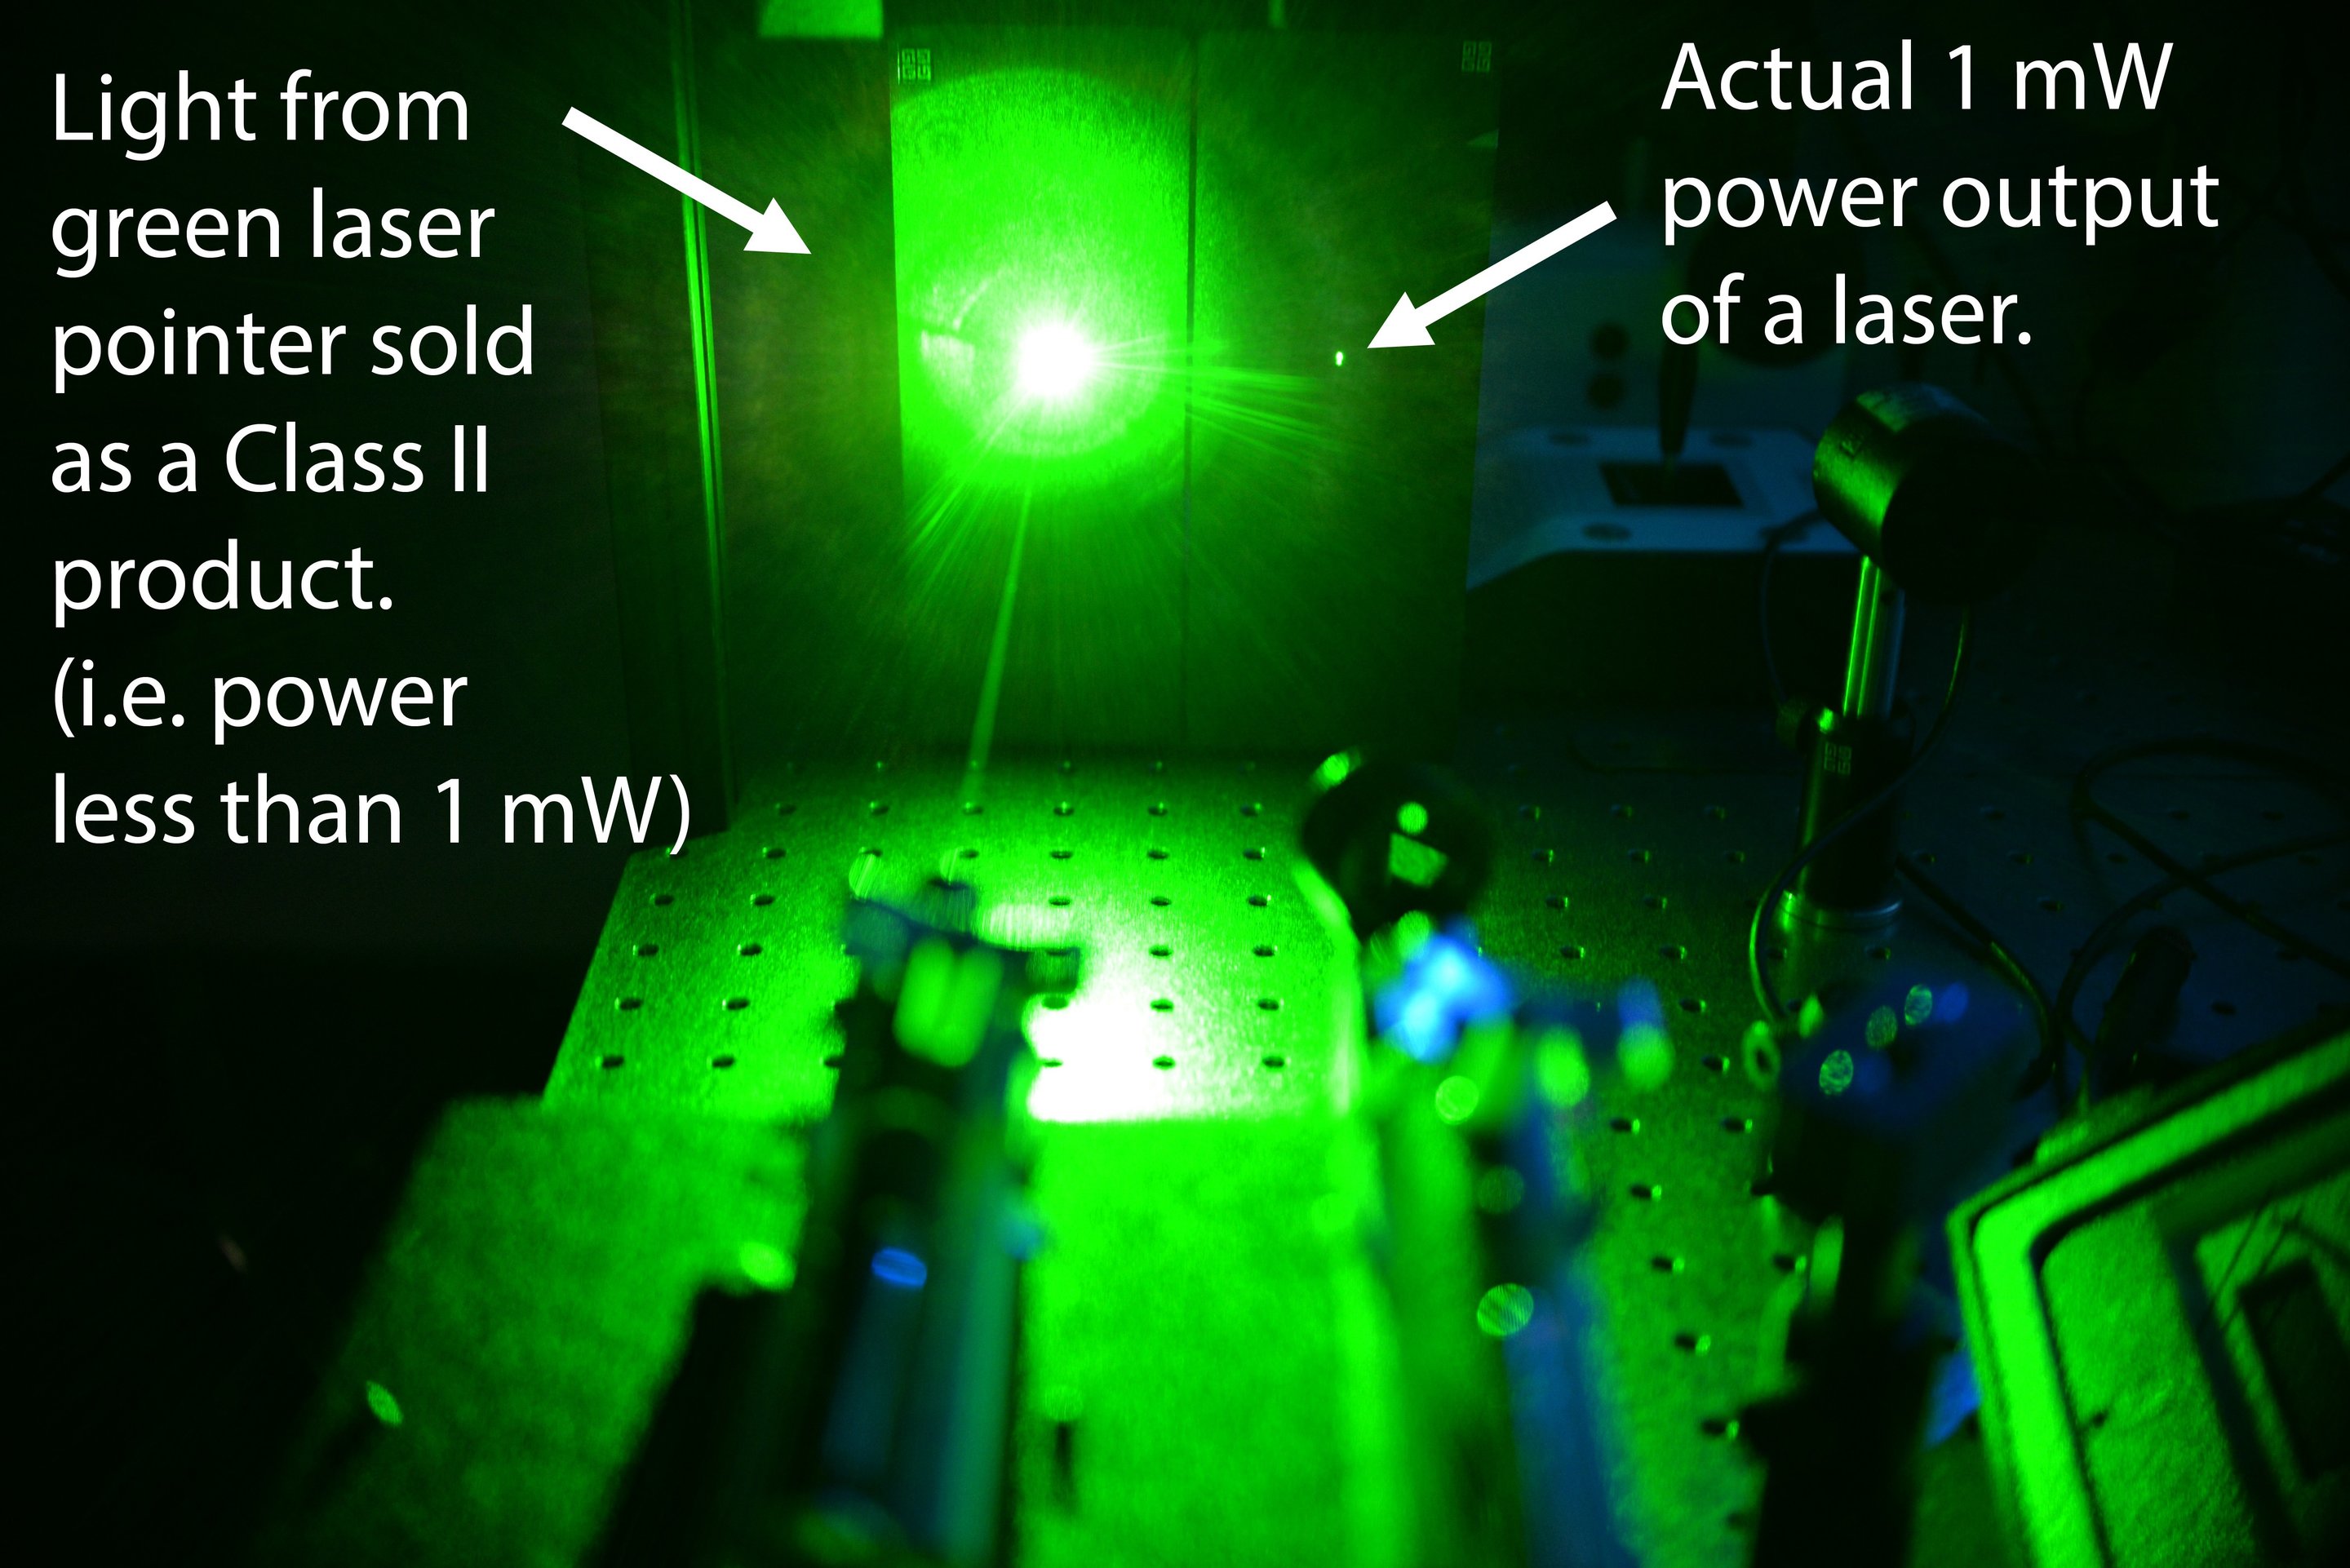 Mal humor caos Permanecer Public unwittingly buying dangerous laser pointers, warn scientists